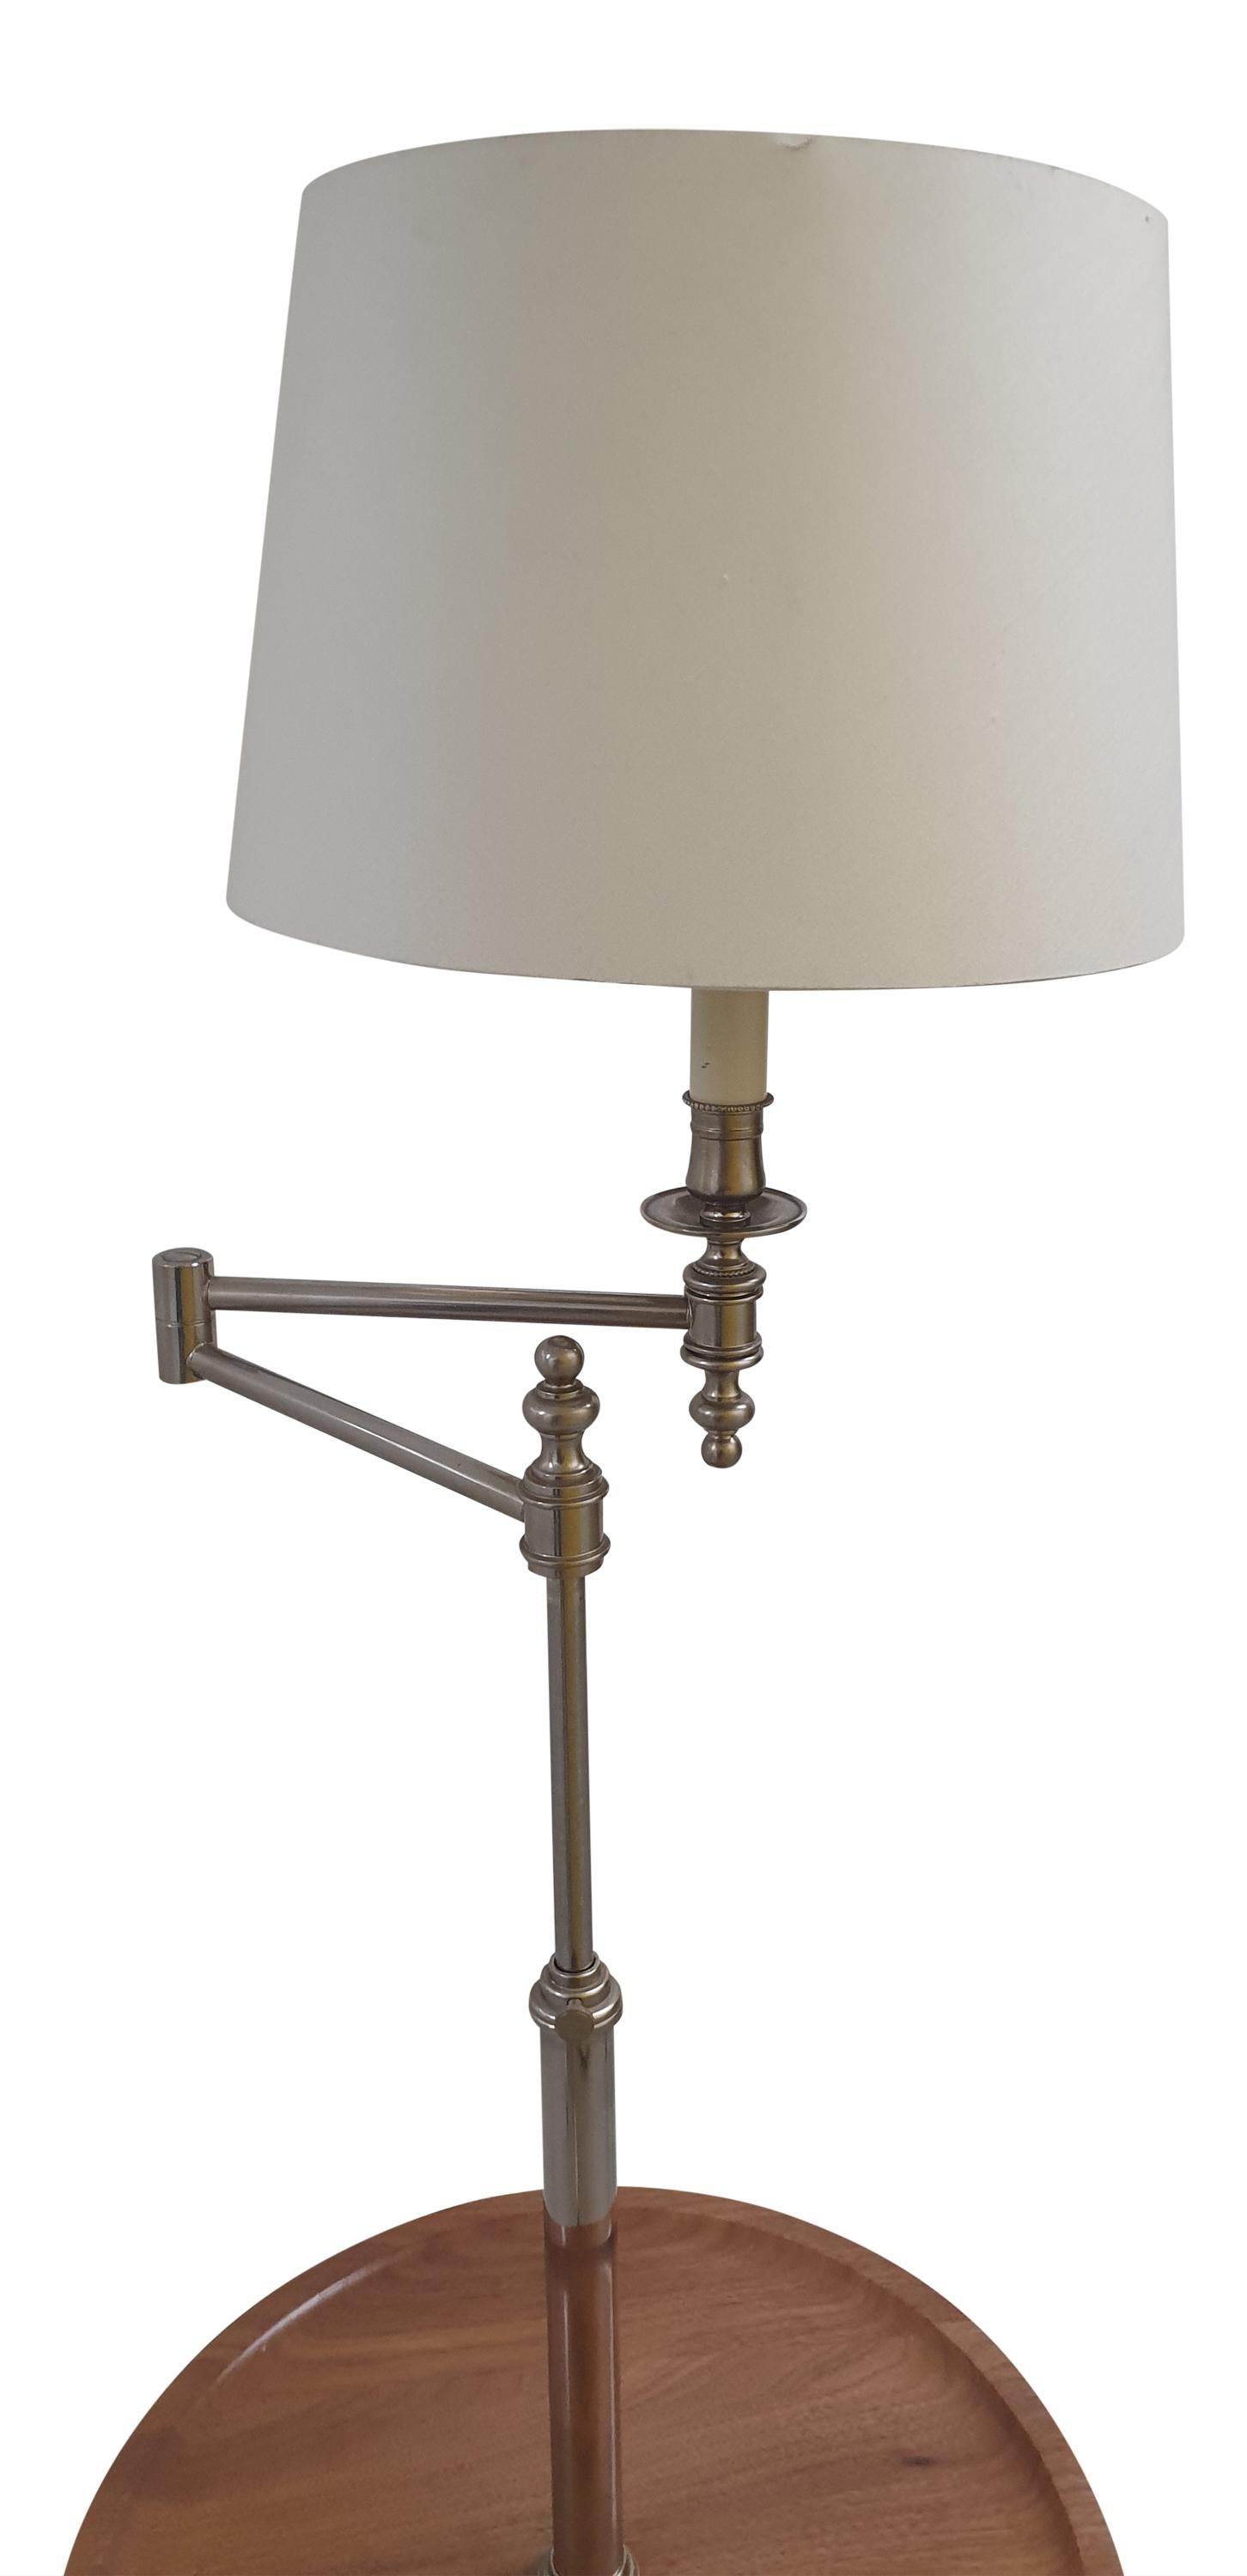 This is a rare LINLEY London swing arm floor lamp from the early noughties. Made from solid cast brass with a spun brass weighted base in Polished Nickel with a LINLEY stamped solid carved American Walnut floating table

The swing arm top is fully